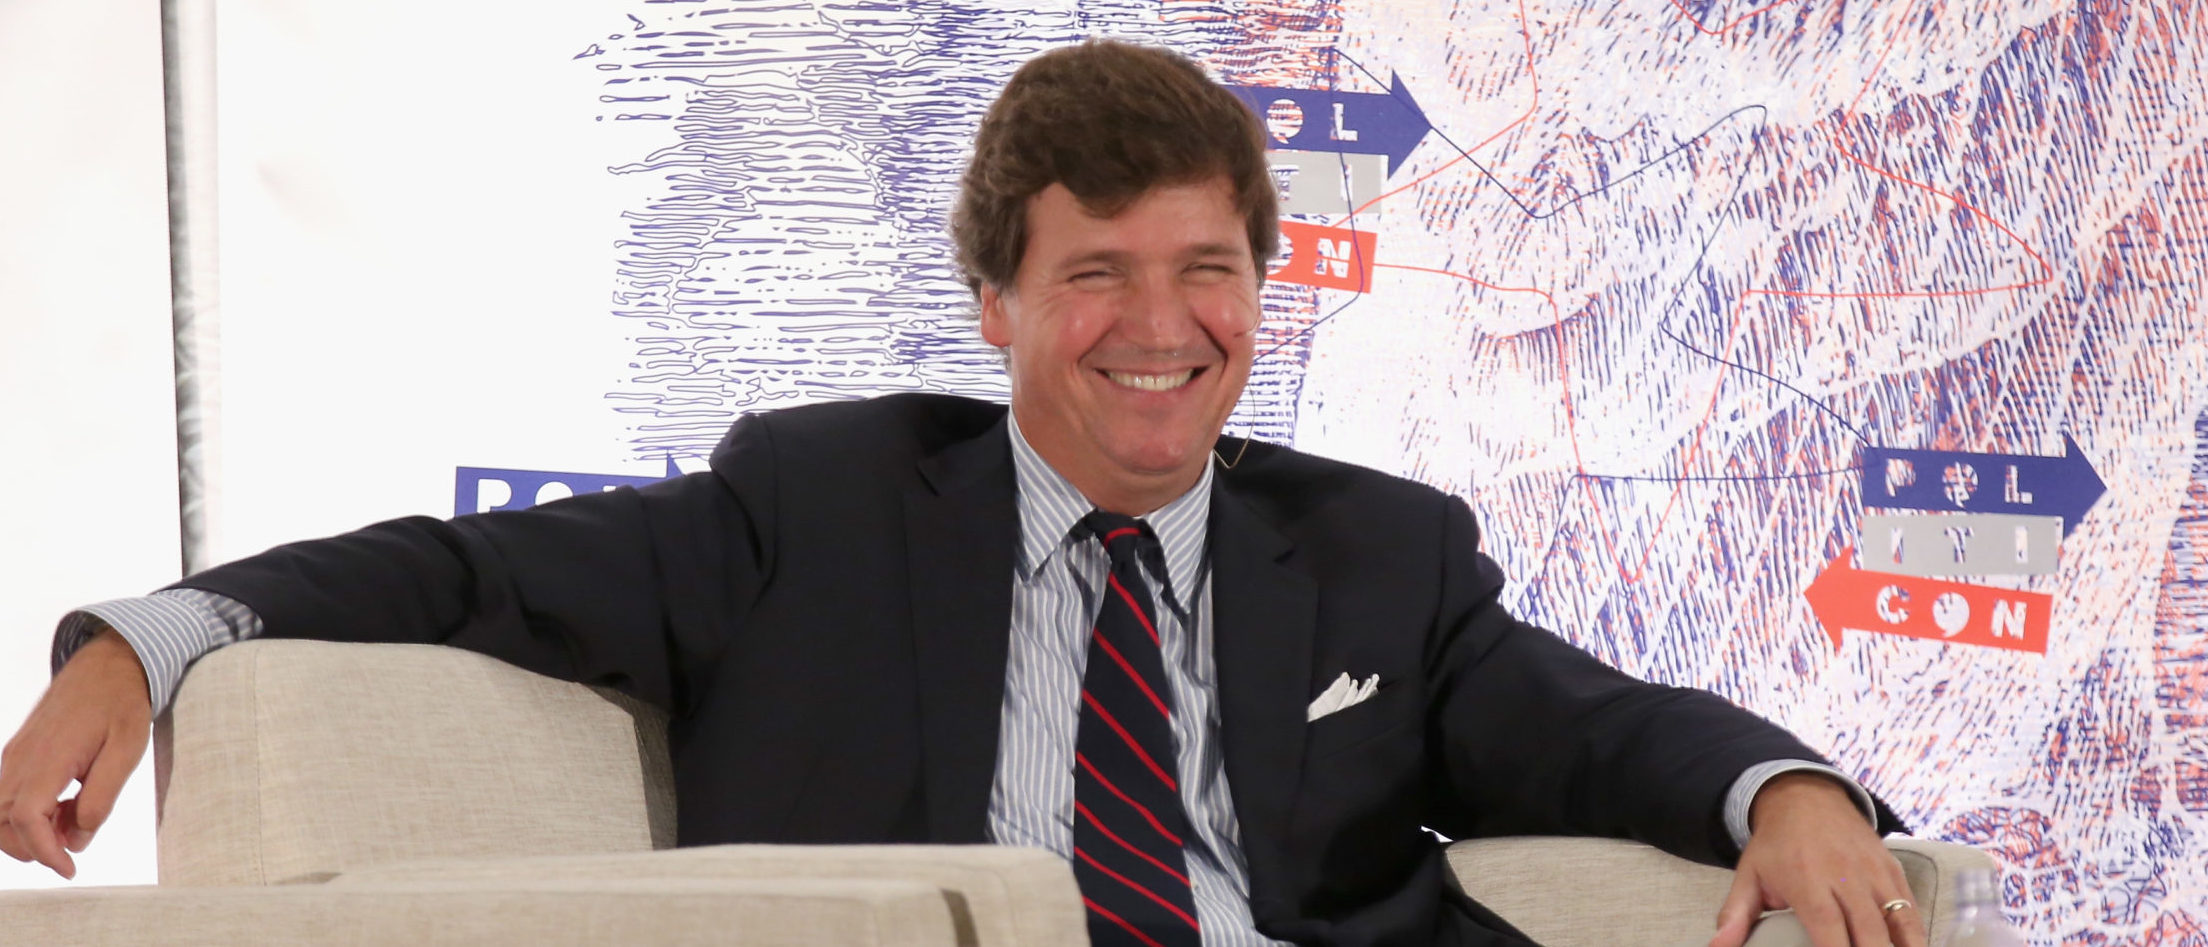  Tucker Carlson speaks onstage during Politicon 2018 at Los Angeles Convention Center on October 21, 2018 (Photo by Phillip Faraone/Getty Images for Politicon) 